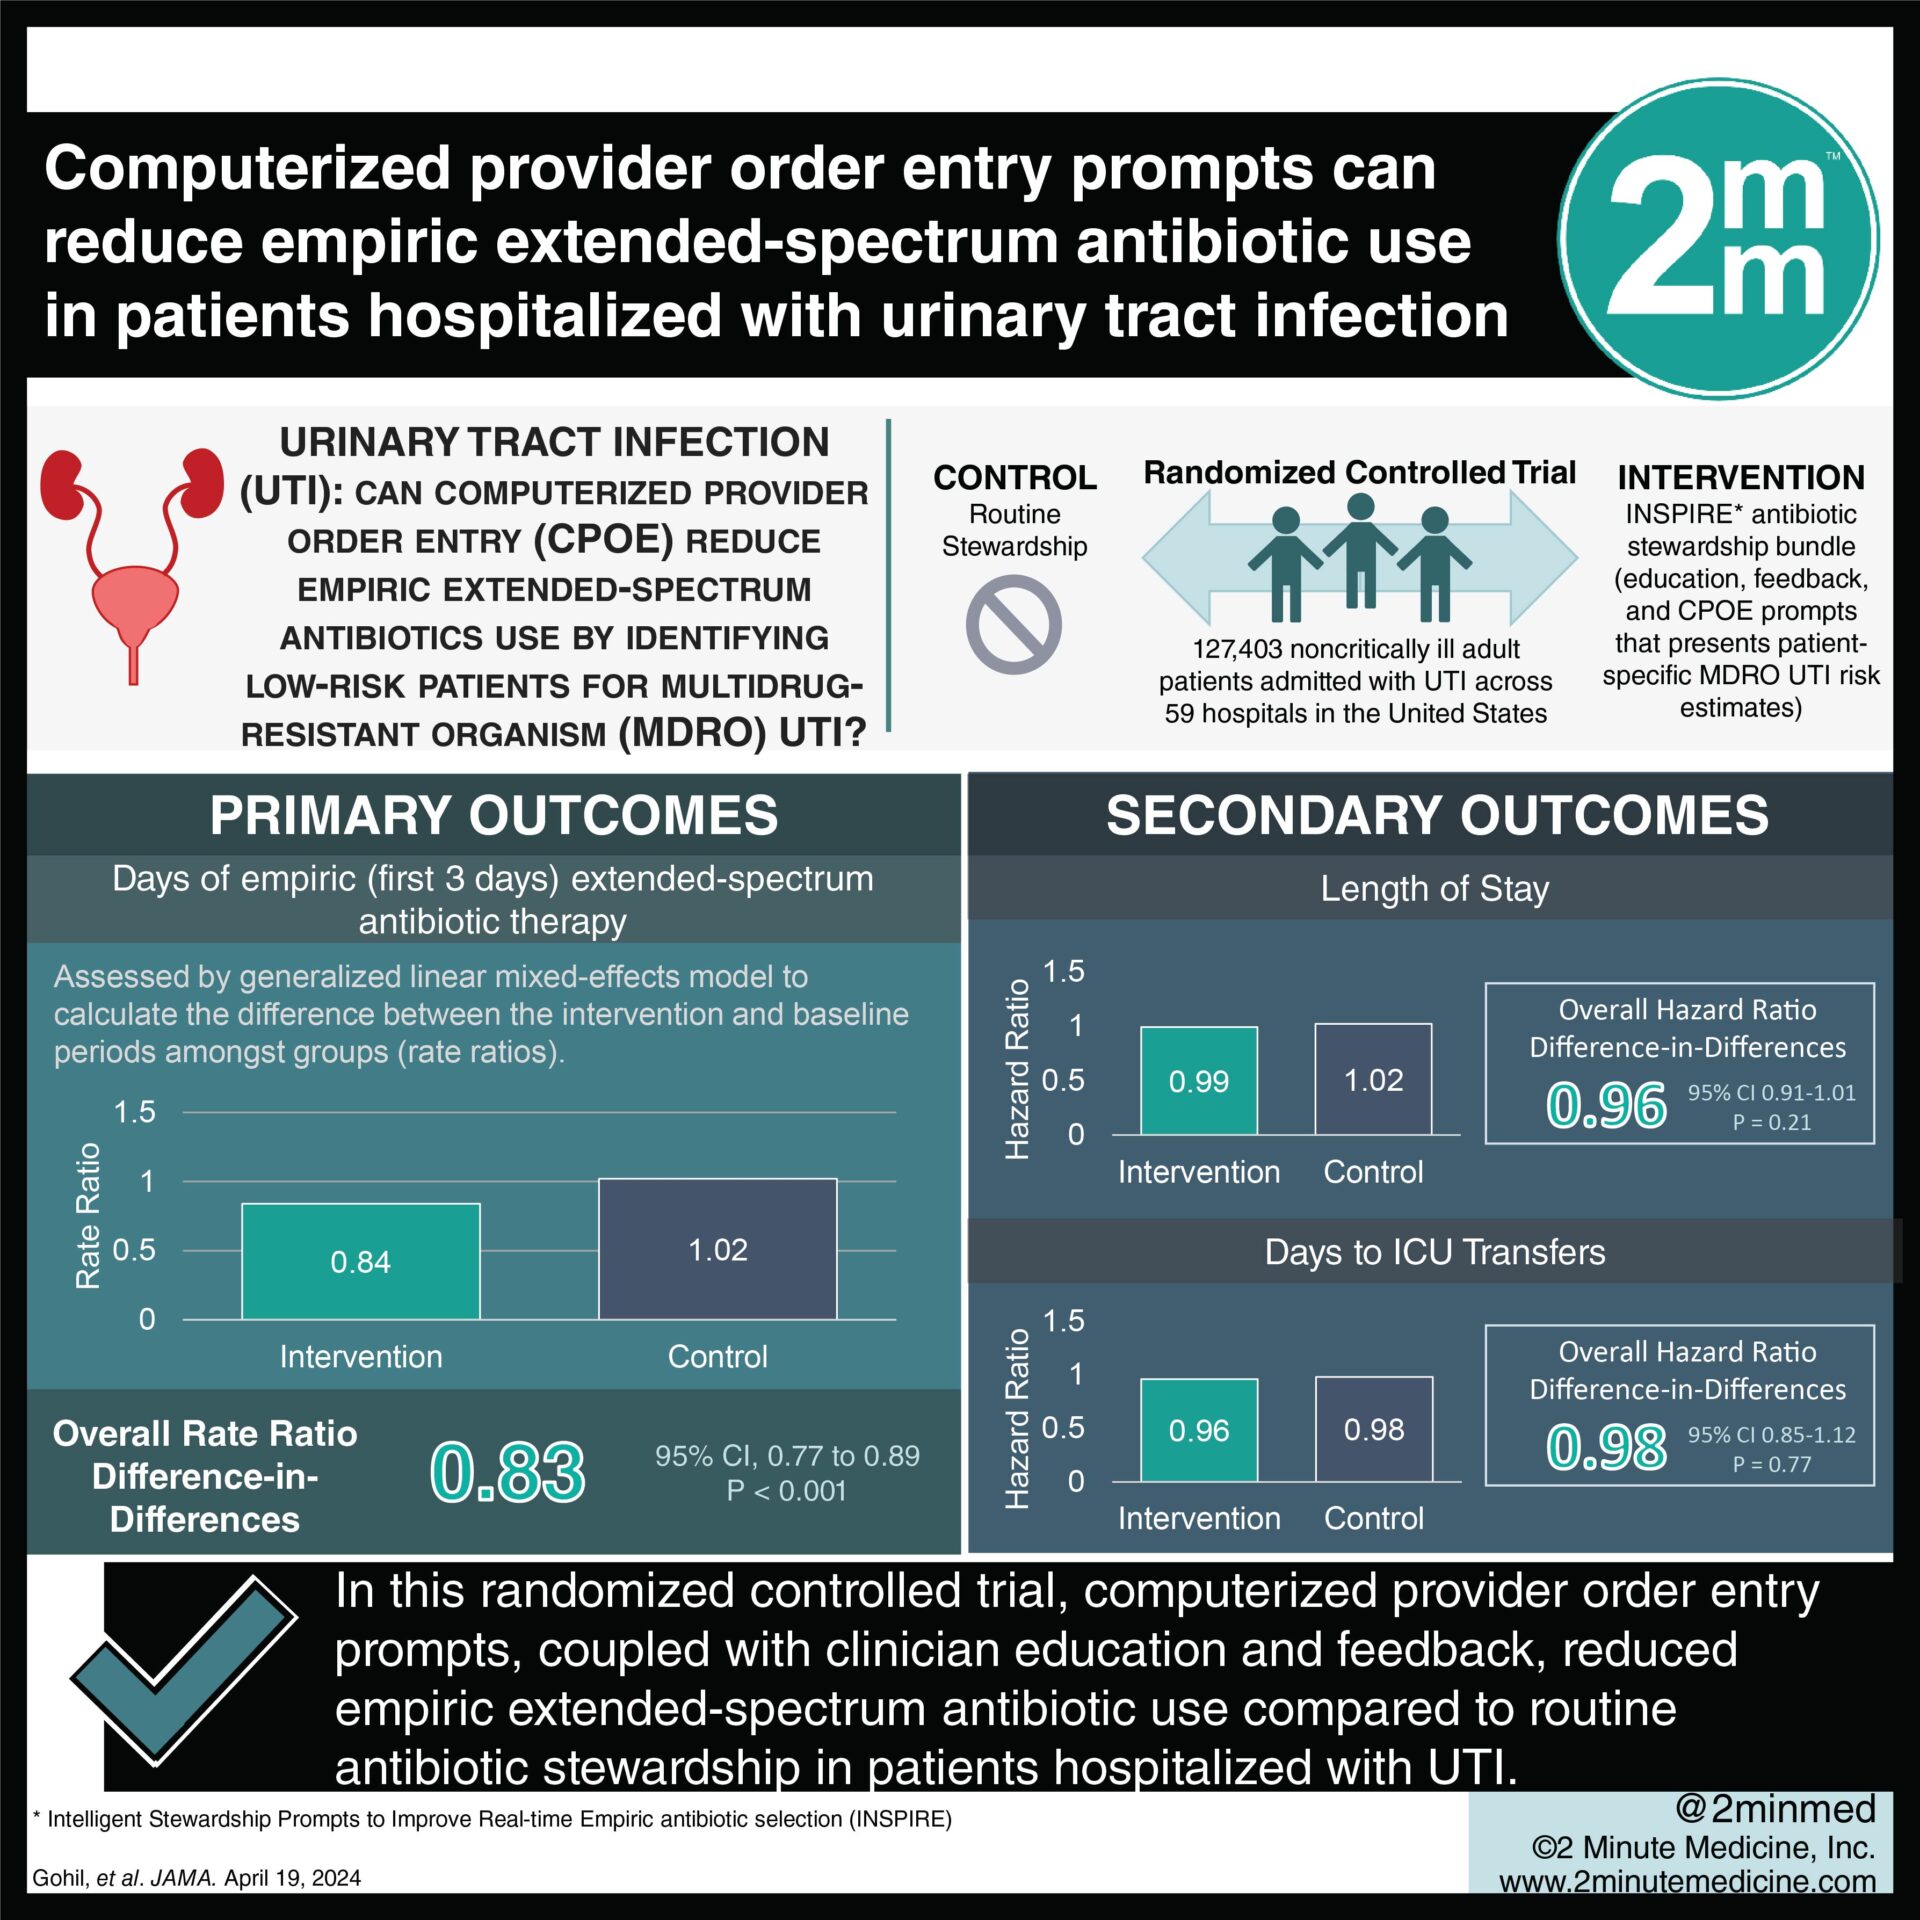 #VisualAbstract: Computerized provider order entry prompts can reduce empiric extended-spectrum antibiotic use in patients hospitalized with urinary tract infection